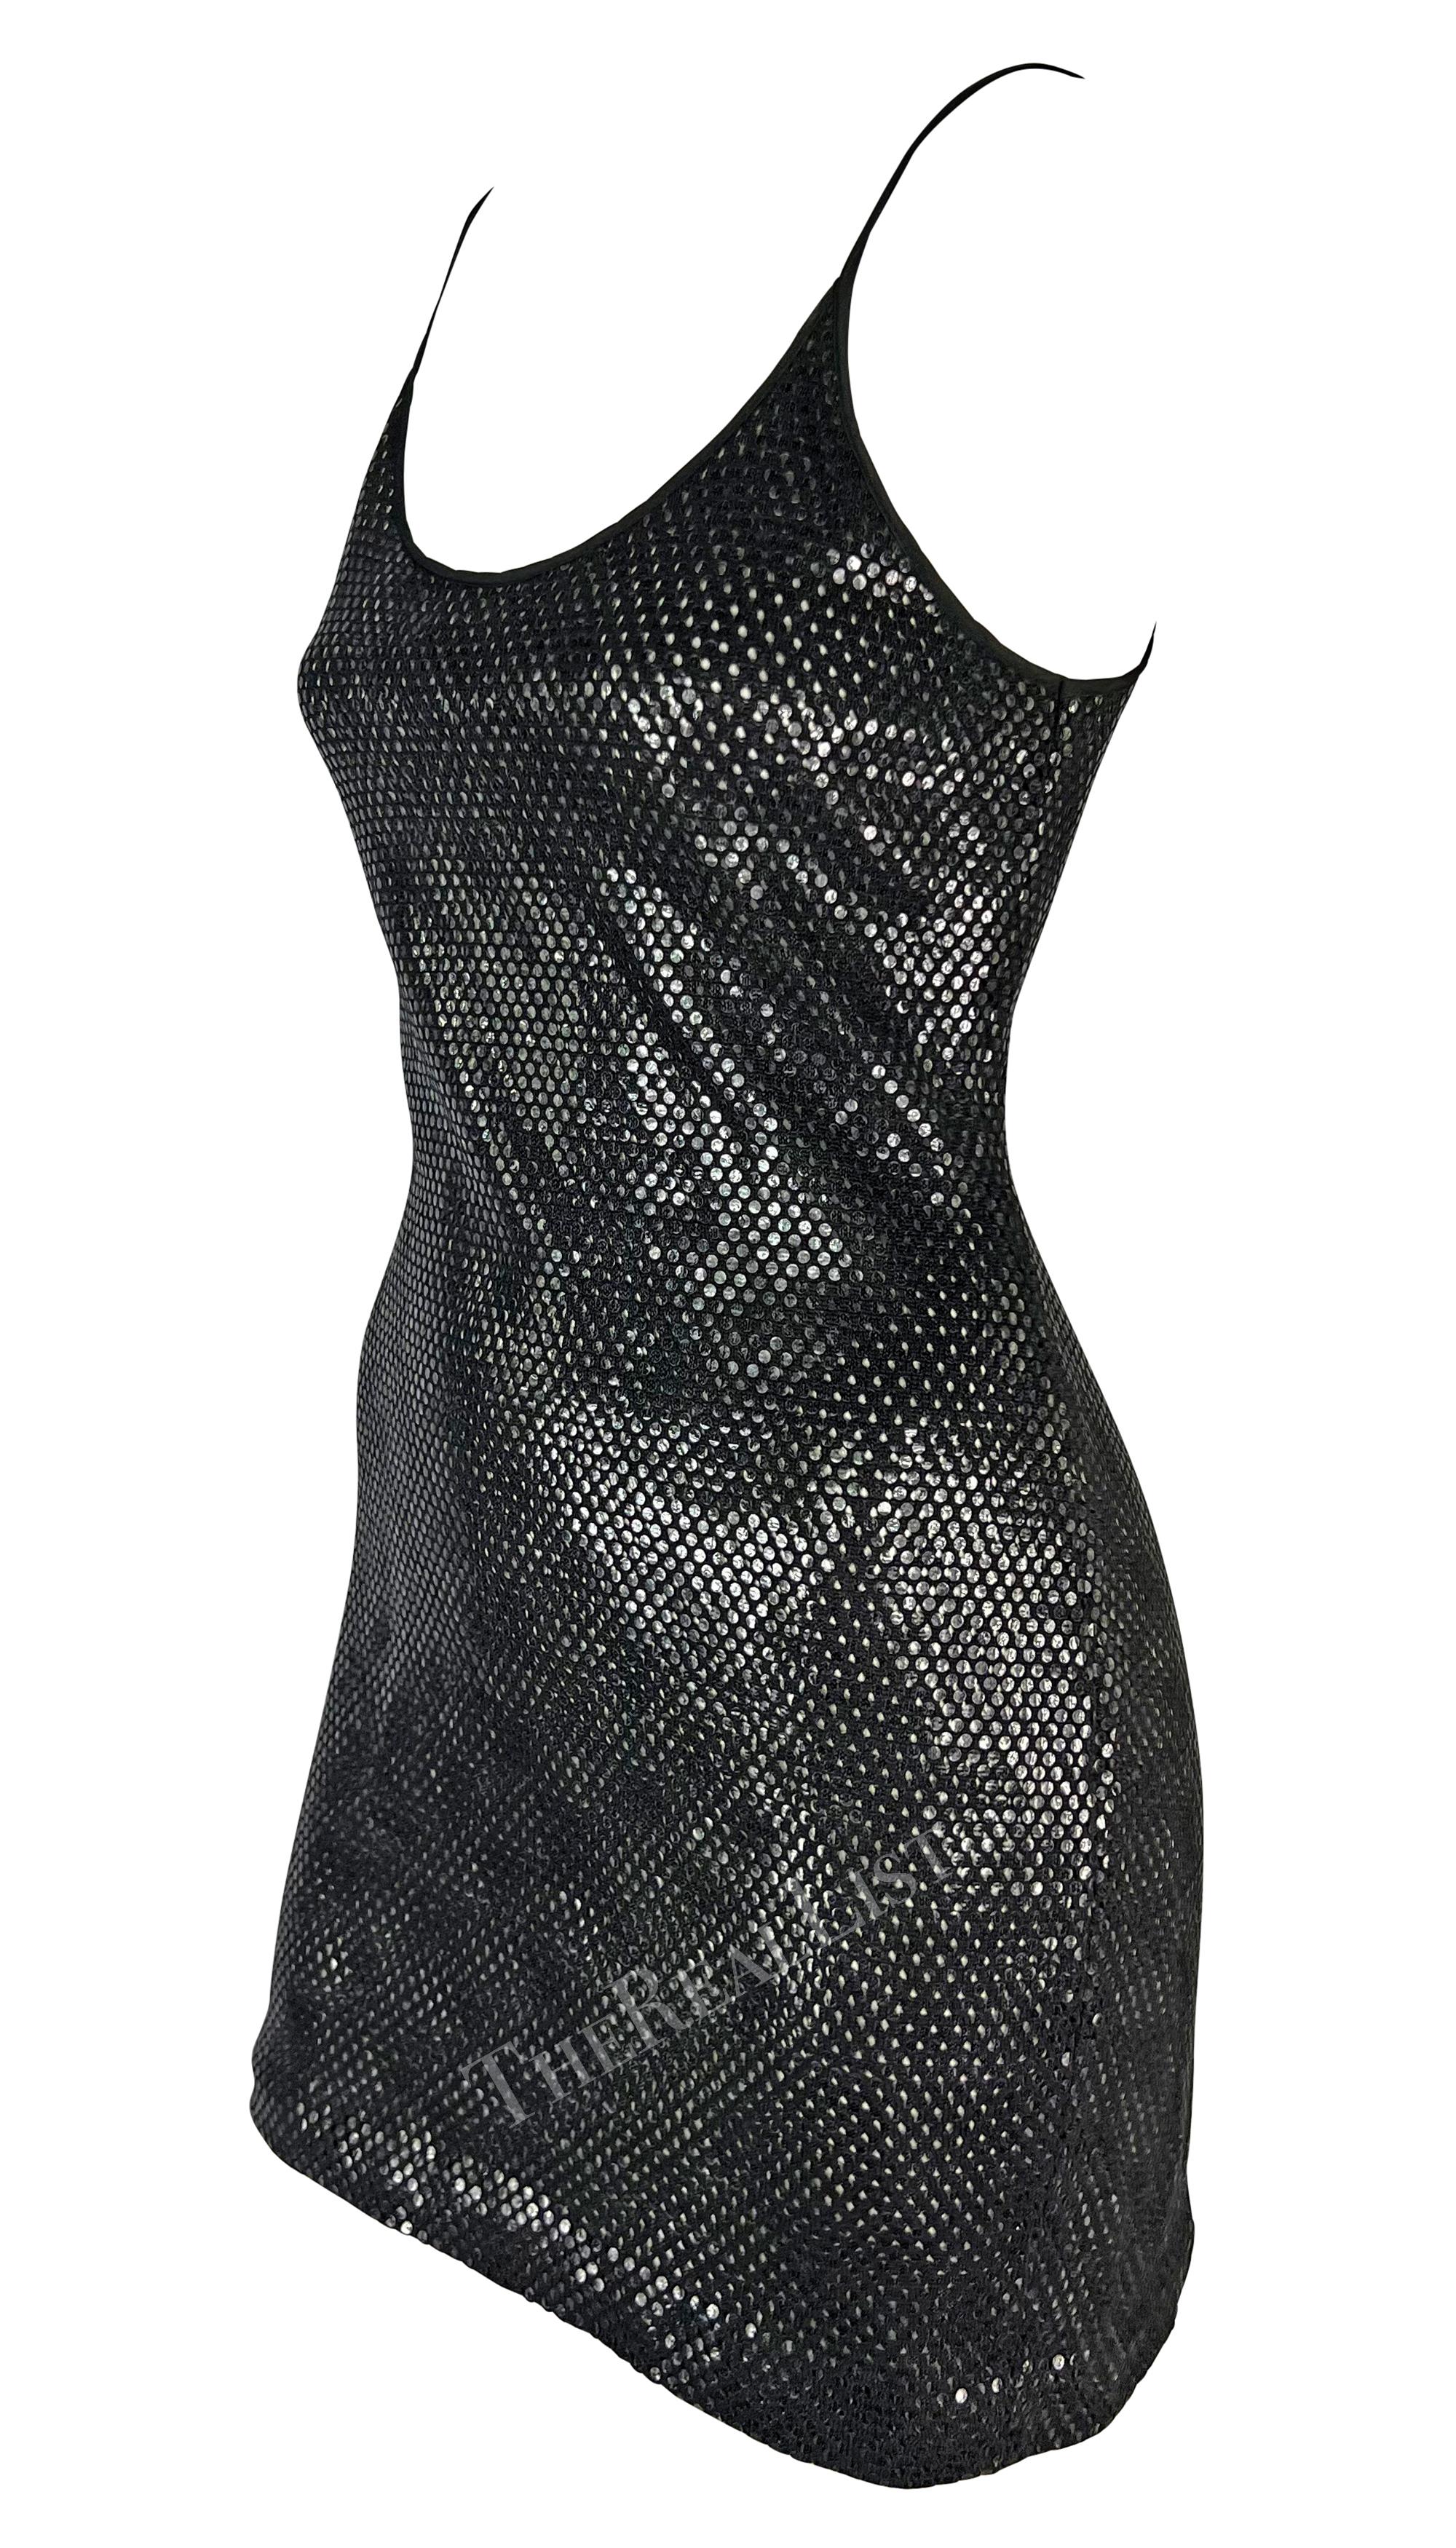 Presenting a stunning black metallic Gianfranco Ferre mini dress. From the 1990s, this mini slip dress, featuring a scoop neckline and thin spaghetti straps, shines with a lightweight eyelet black base covered in transparent round paillettes. Sexy